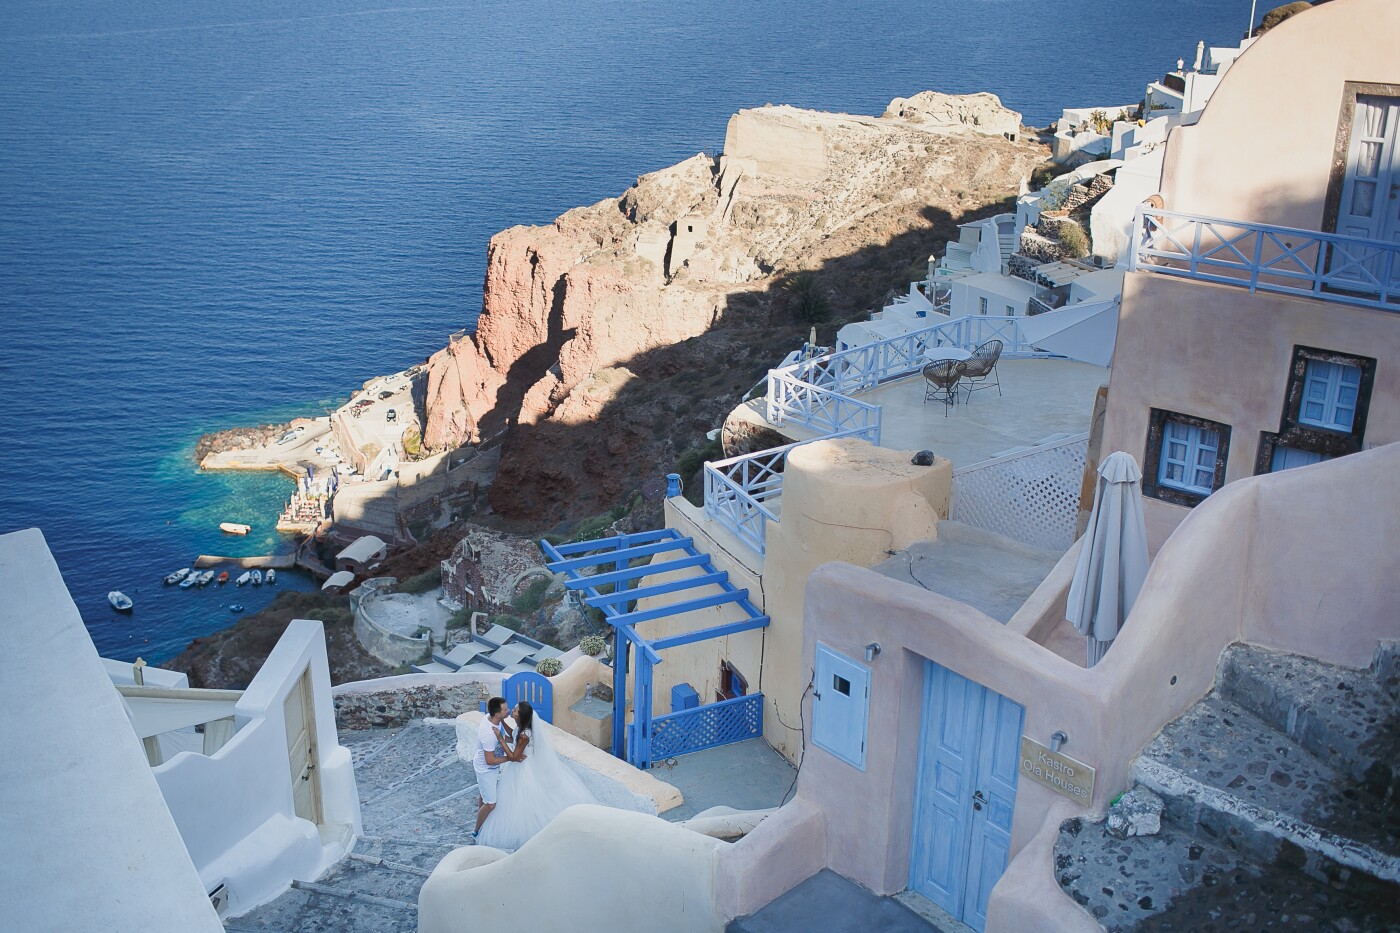 To work in Santorini - what could be better! Unforgettable views and cozy corners around every corner. The guys came to the island on their honeymoon, to renew their wedding story. And I was glad to spend the day with them.